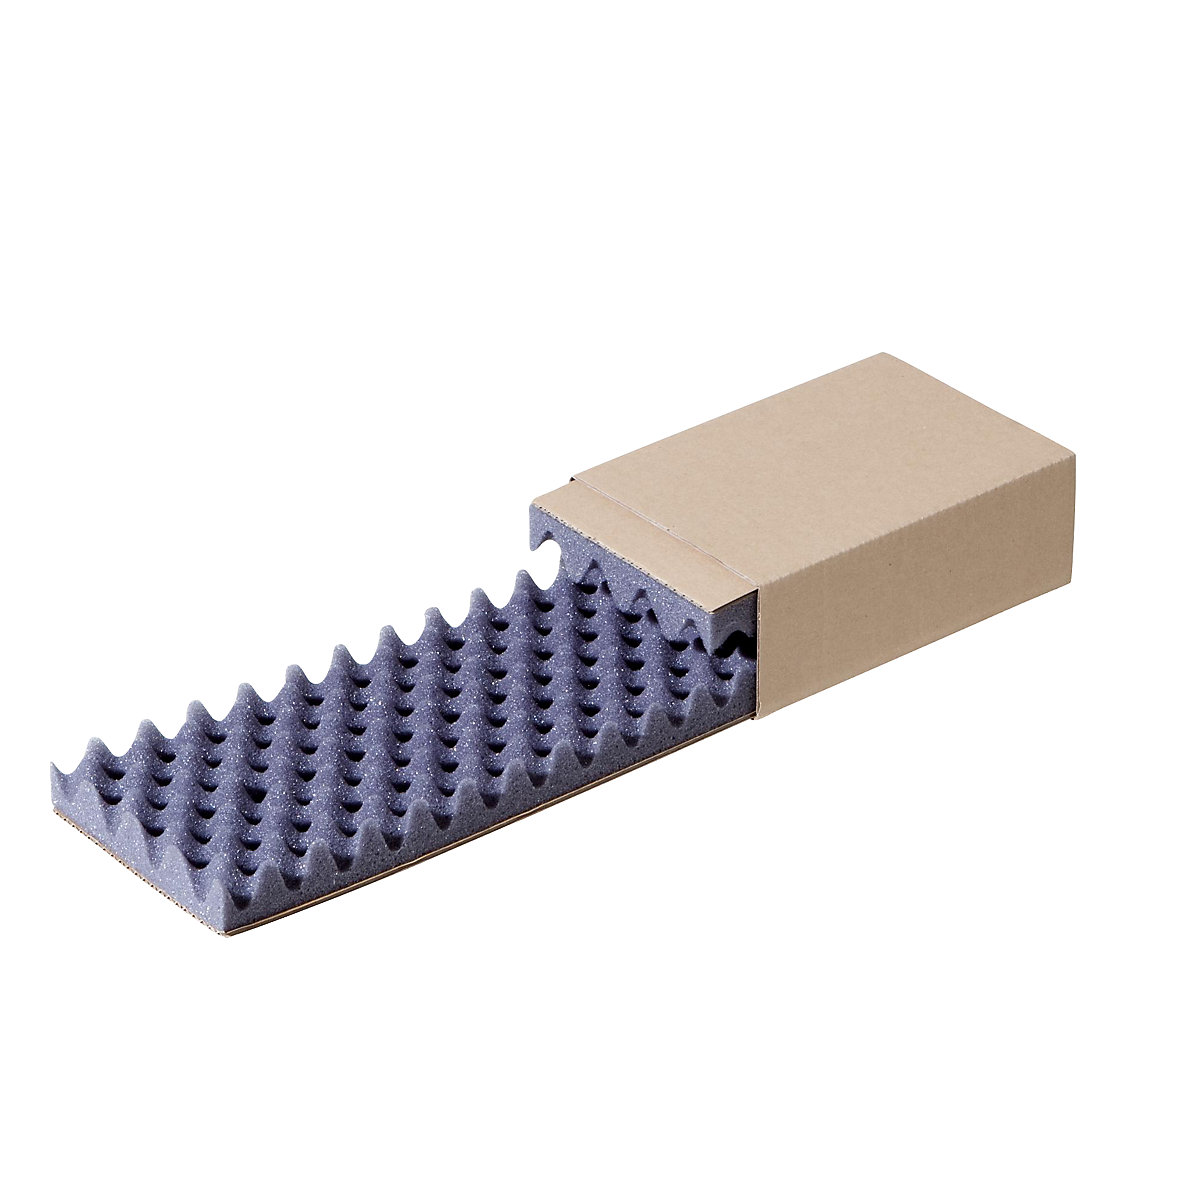 Slide boxes, internal part FEFCO 0907, external part FEFCO 0503, padded, internal dimensions 210 x 140 x 65 mm, pack of 100